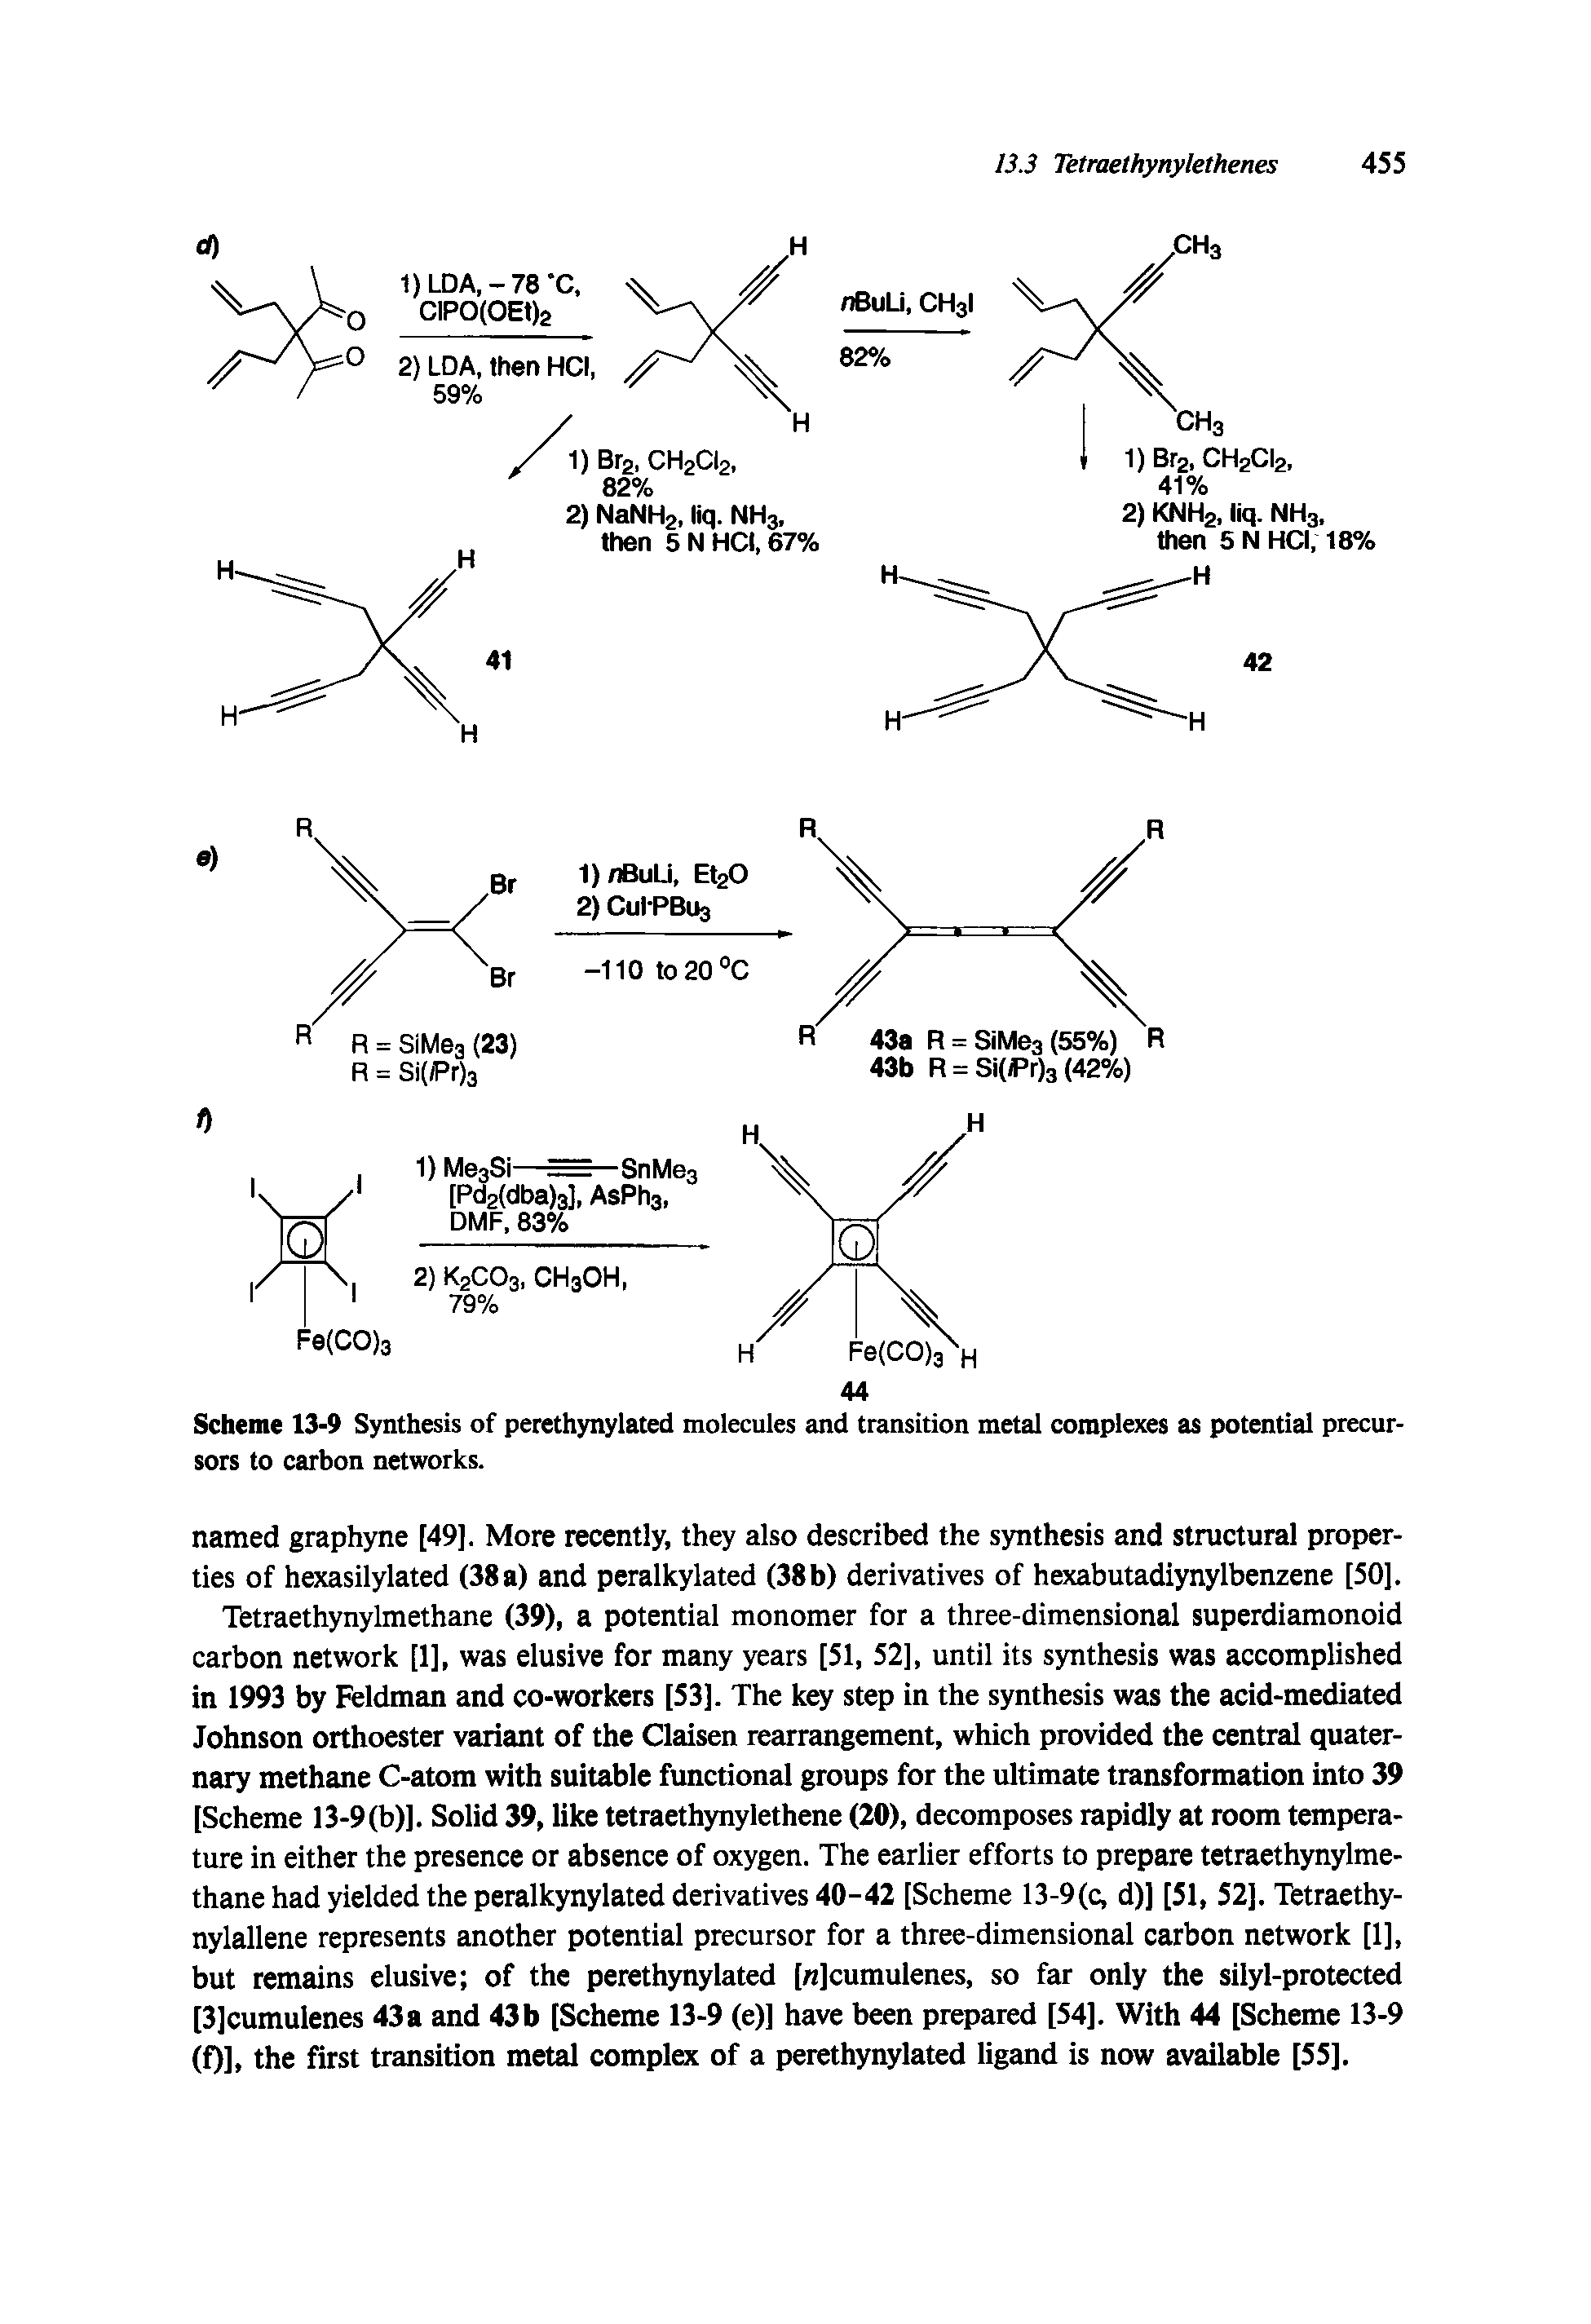 Scheme 13-9 Synthesis of perethynylated molecules and transition metal complexes as potential precursors to carbon networks.